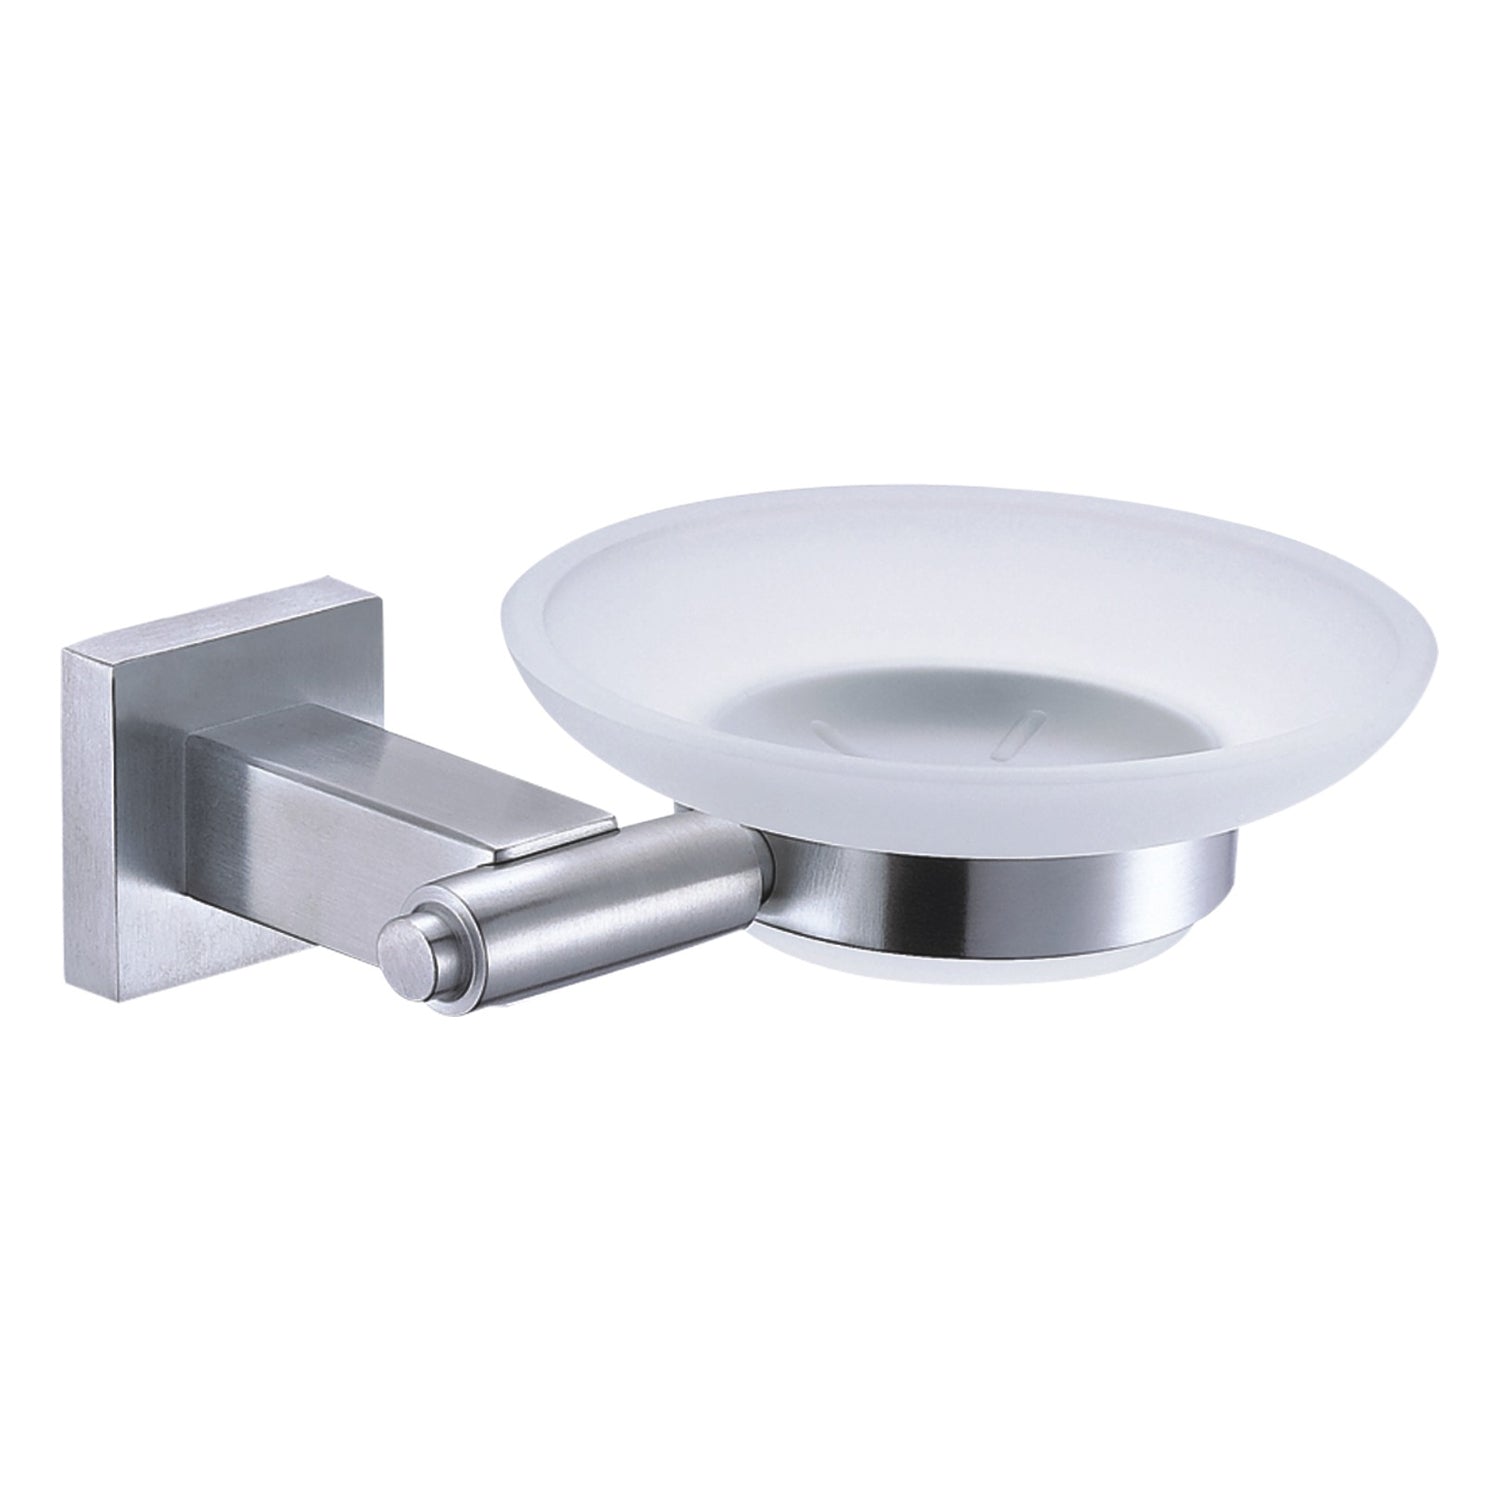 DAX Stainless Steel Soap Dish, Wall Mount with Glass Tray, Polish Finish, 5-7/16 x 1-7/8 x 4-3/4 Inches (DAX-G0105-P)